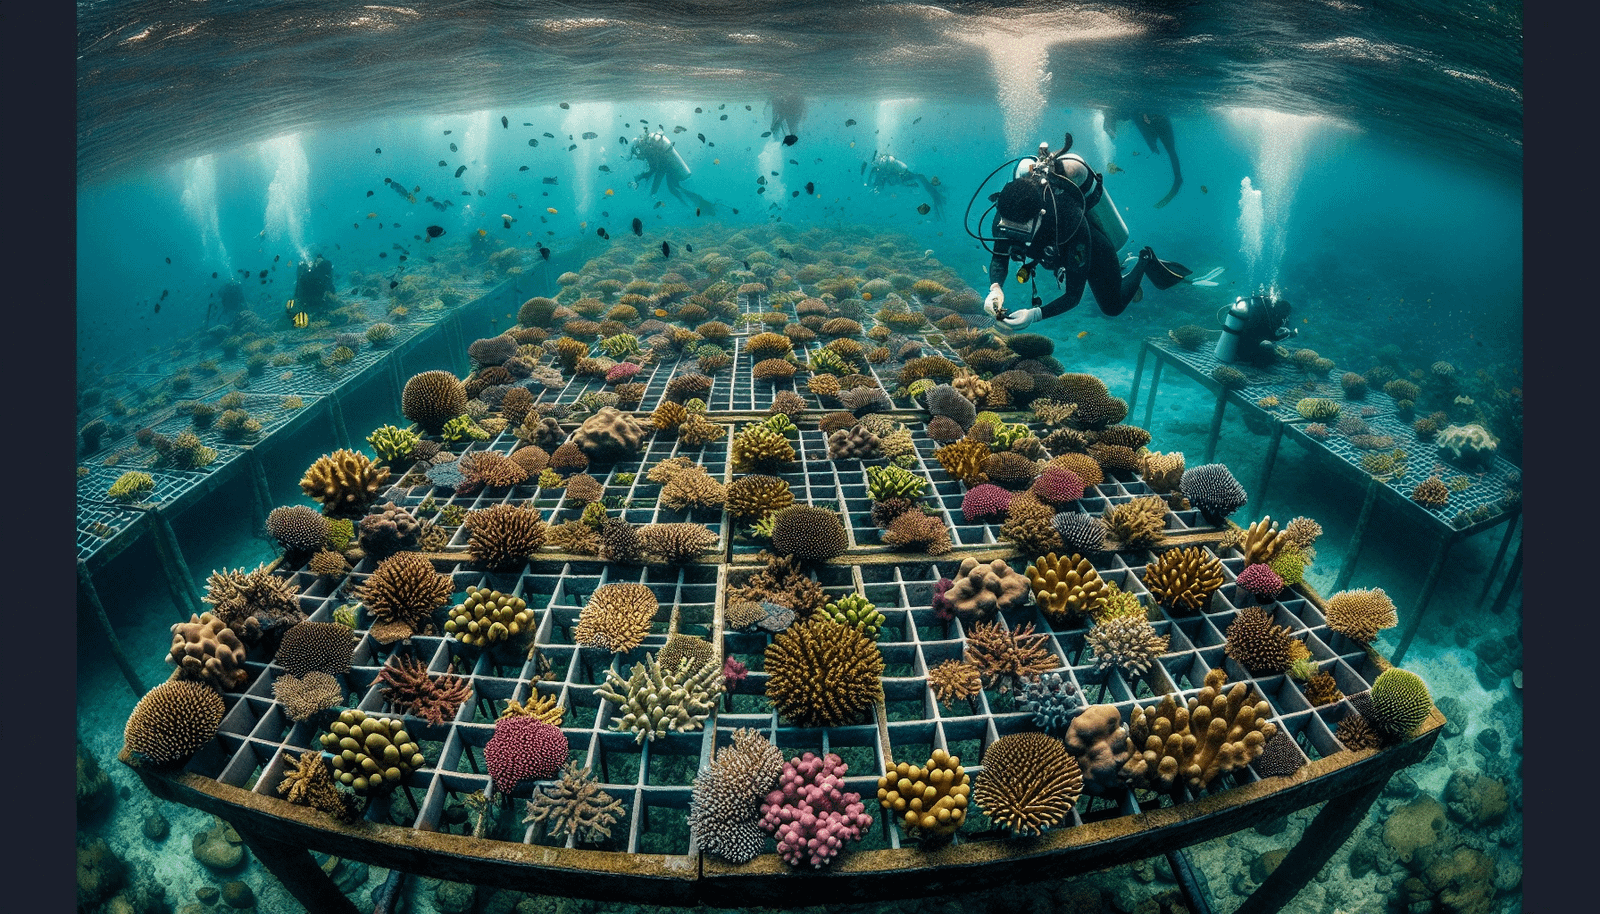 Coral fragmentation and nursery cultivation process